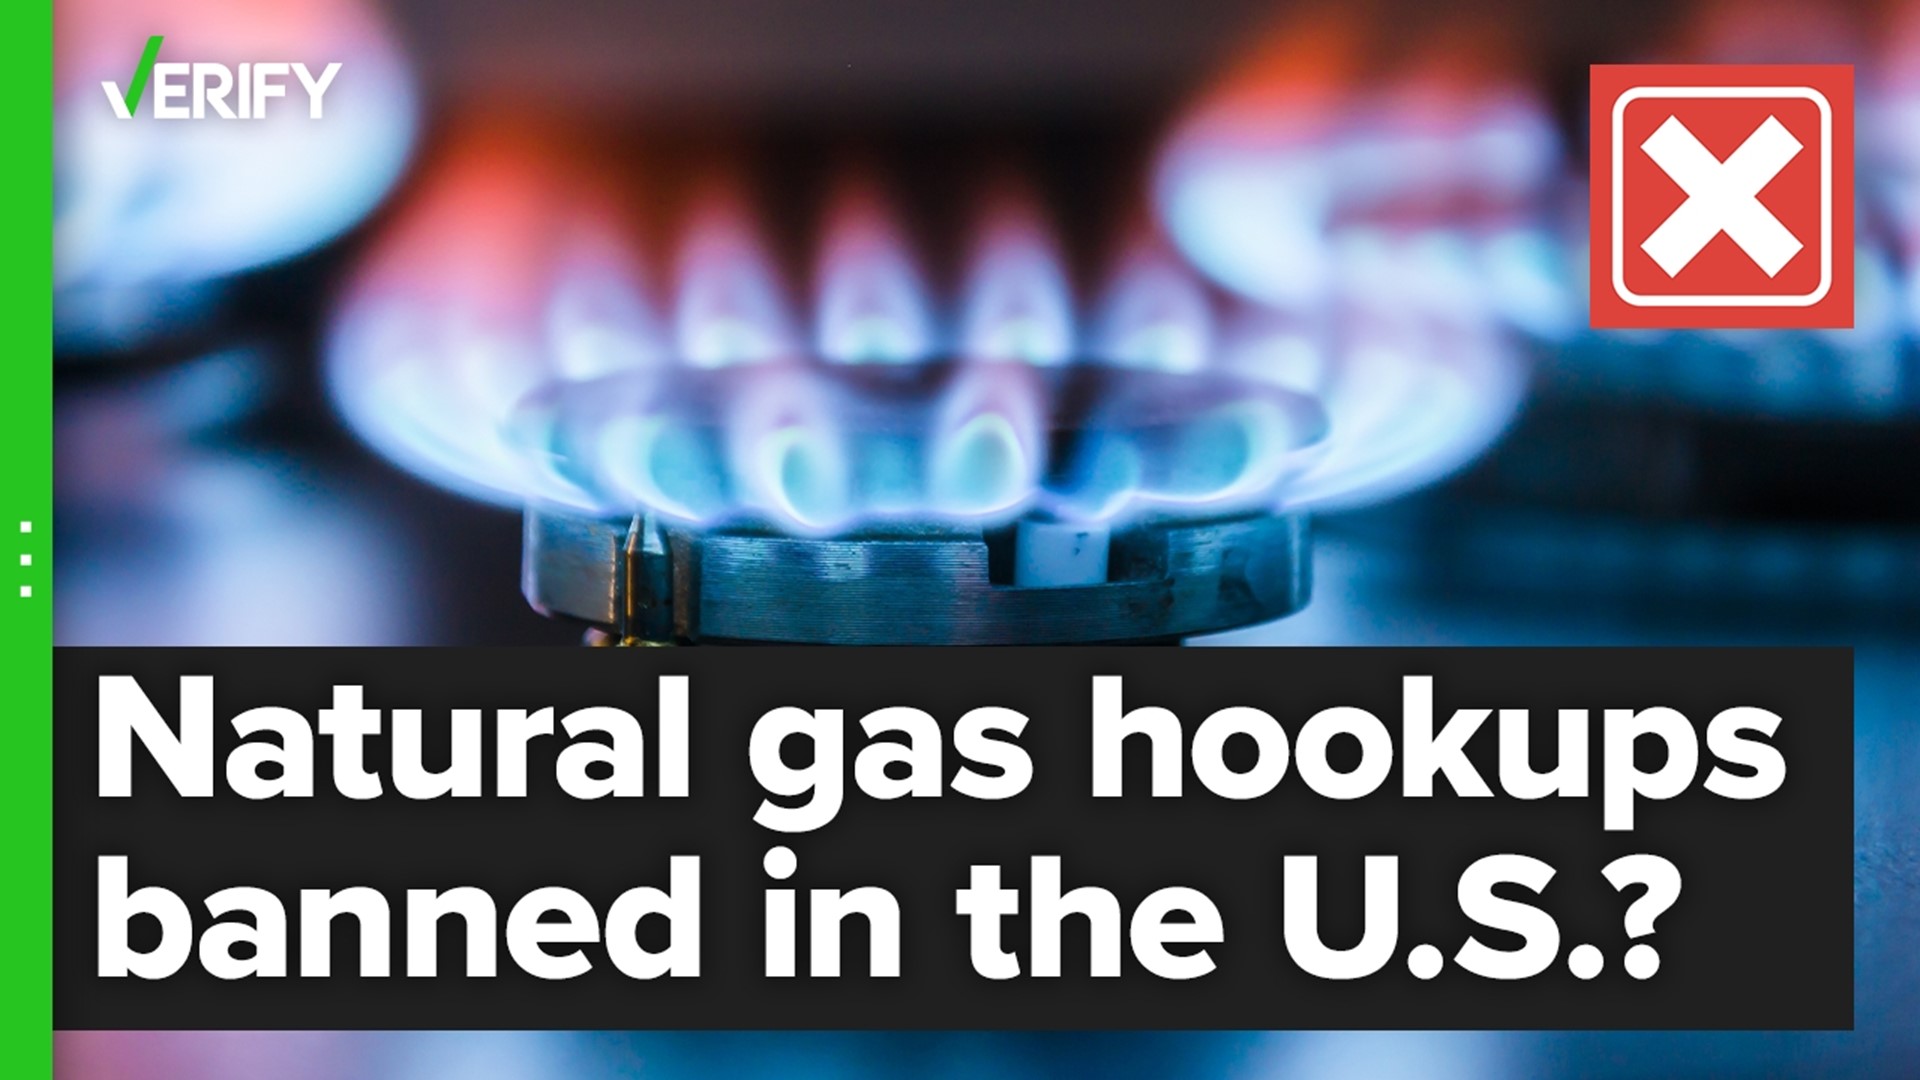 Is there a national ban on new natural gas hookups in the U.S.? The VERIFY team confirms this is false.